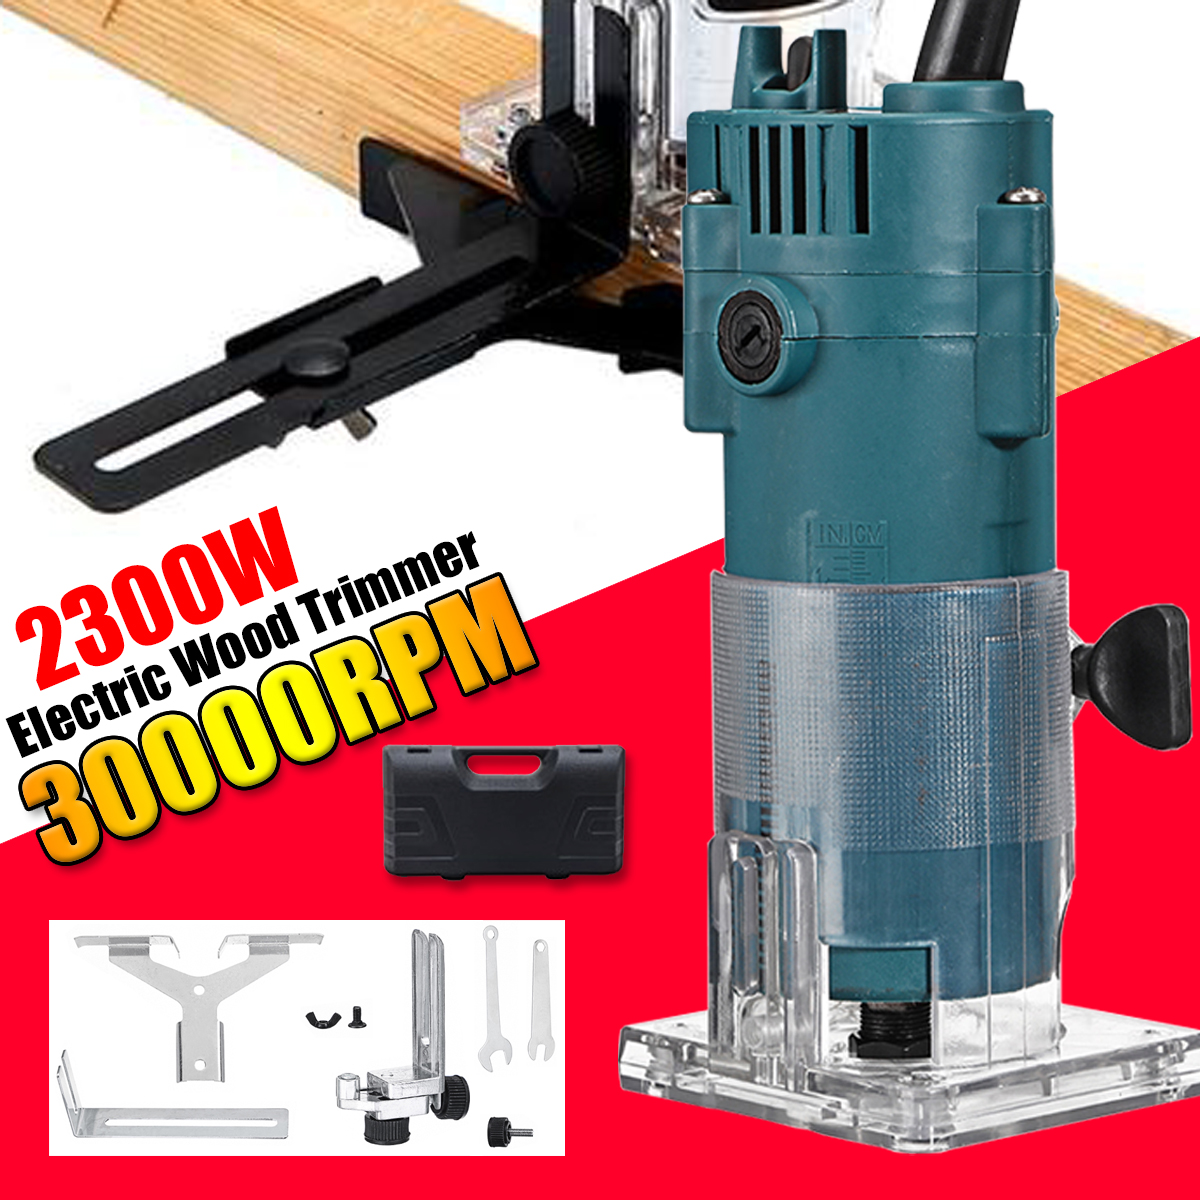 30000RPM-Electric-Hand-Trimmer-Router-Wood-Laminate-Palm-Joiners-Working-Cutting-Tool-1747934-1